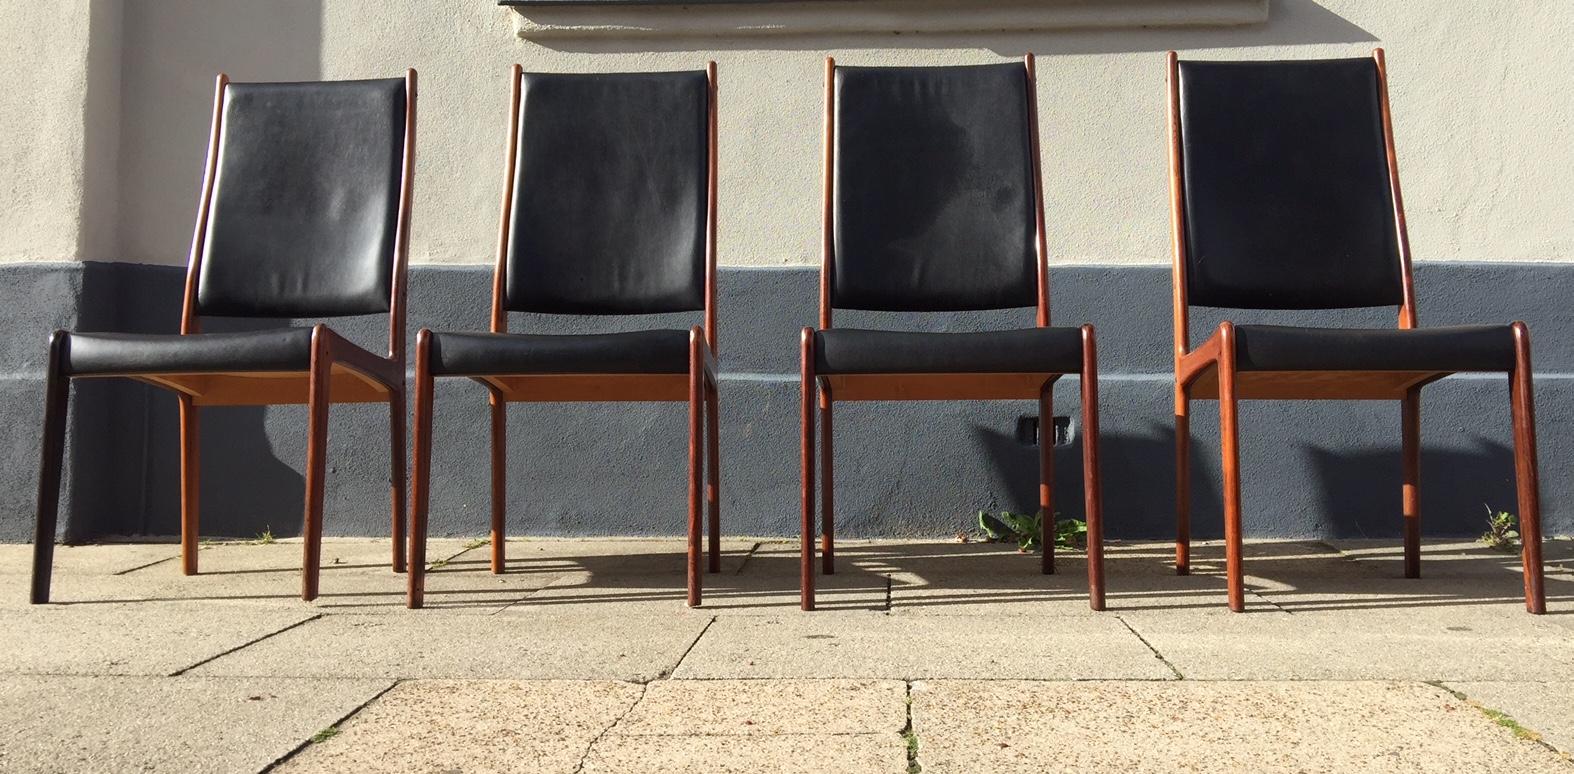 This set of four dining chairs was designed by Johannes Andersen, produced by Mogens Kold, and distributed via Kawolco in Denmark during the 1960s. The chairs are made from rosewood and have the original black leather upholstery.